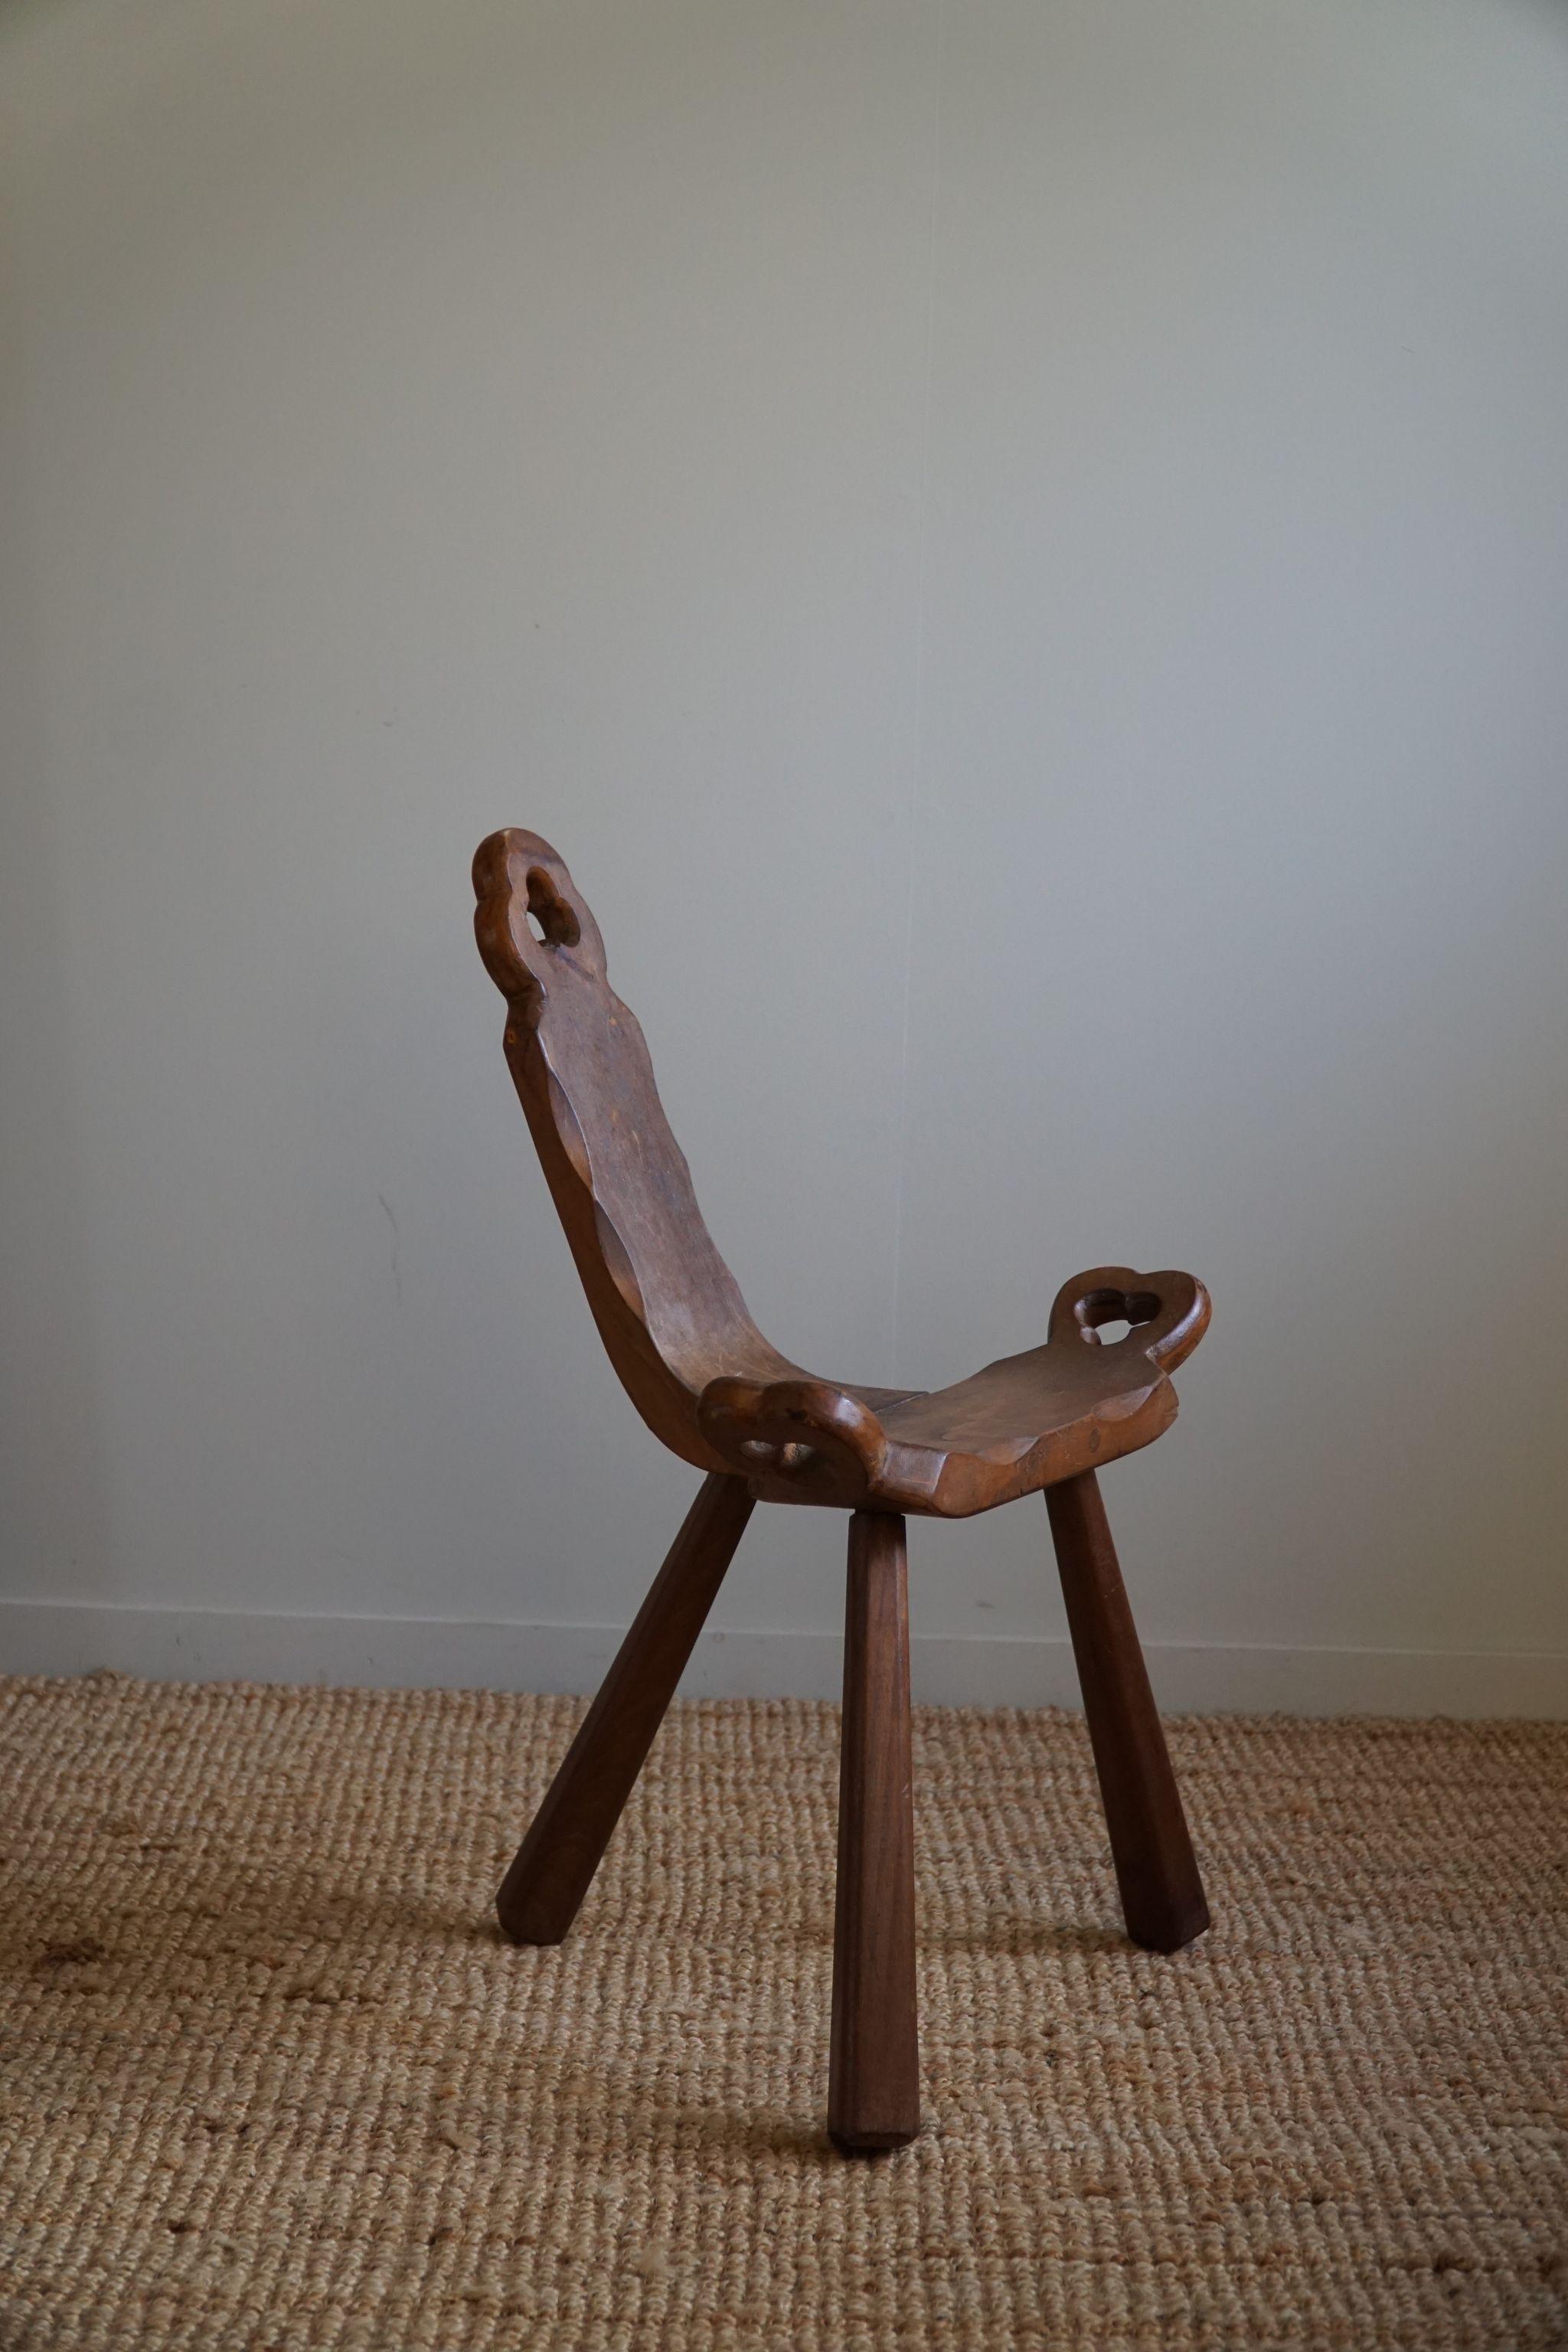 antique birthing chair value